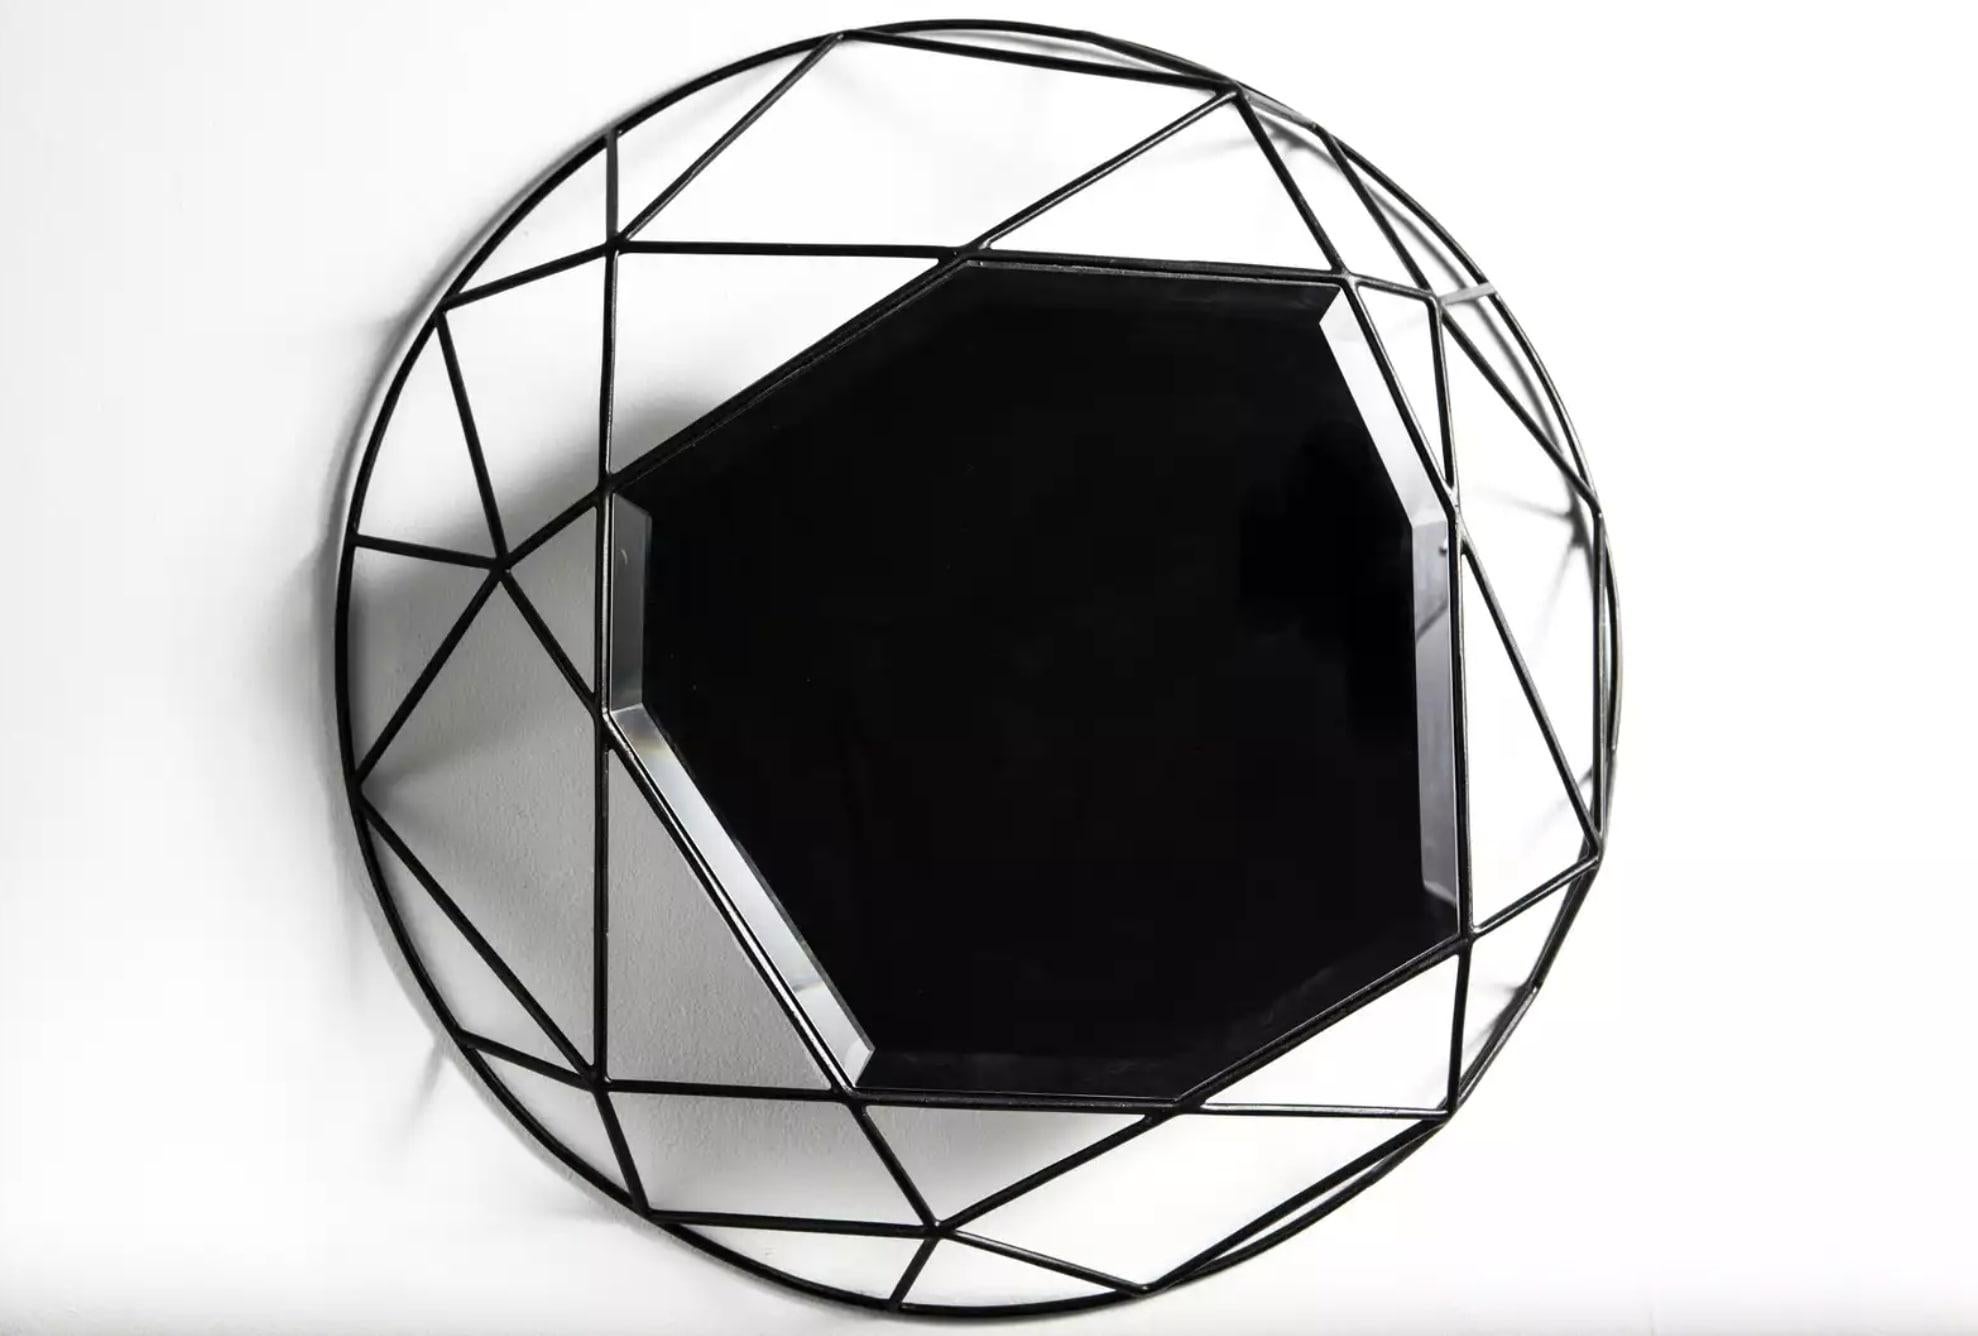 This powder-coated wrought iron and glass mirror by Sam Baron was first exhibited at the Design Miami Fair in 2014.

Born in France in 1976, Sam Baron has a degree in Design from the Fine Arts School of Saint Etienne and a post-graduate degree